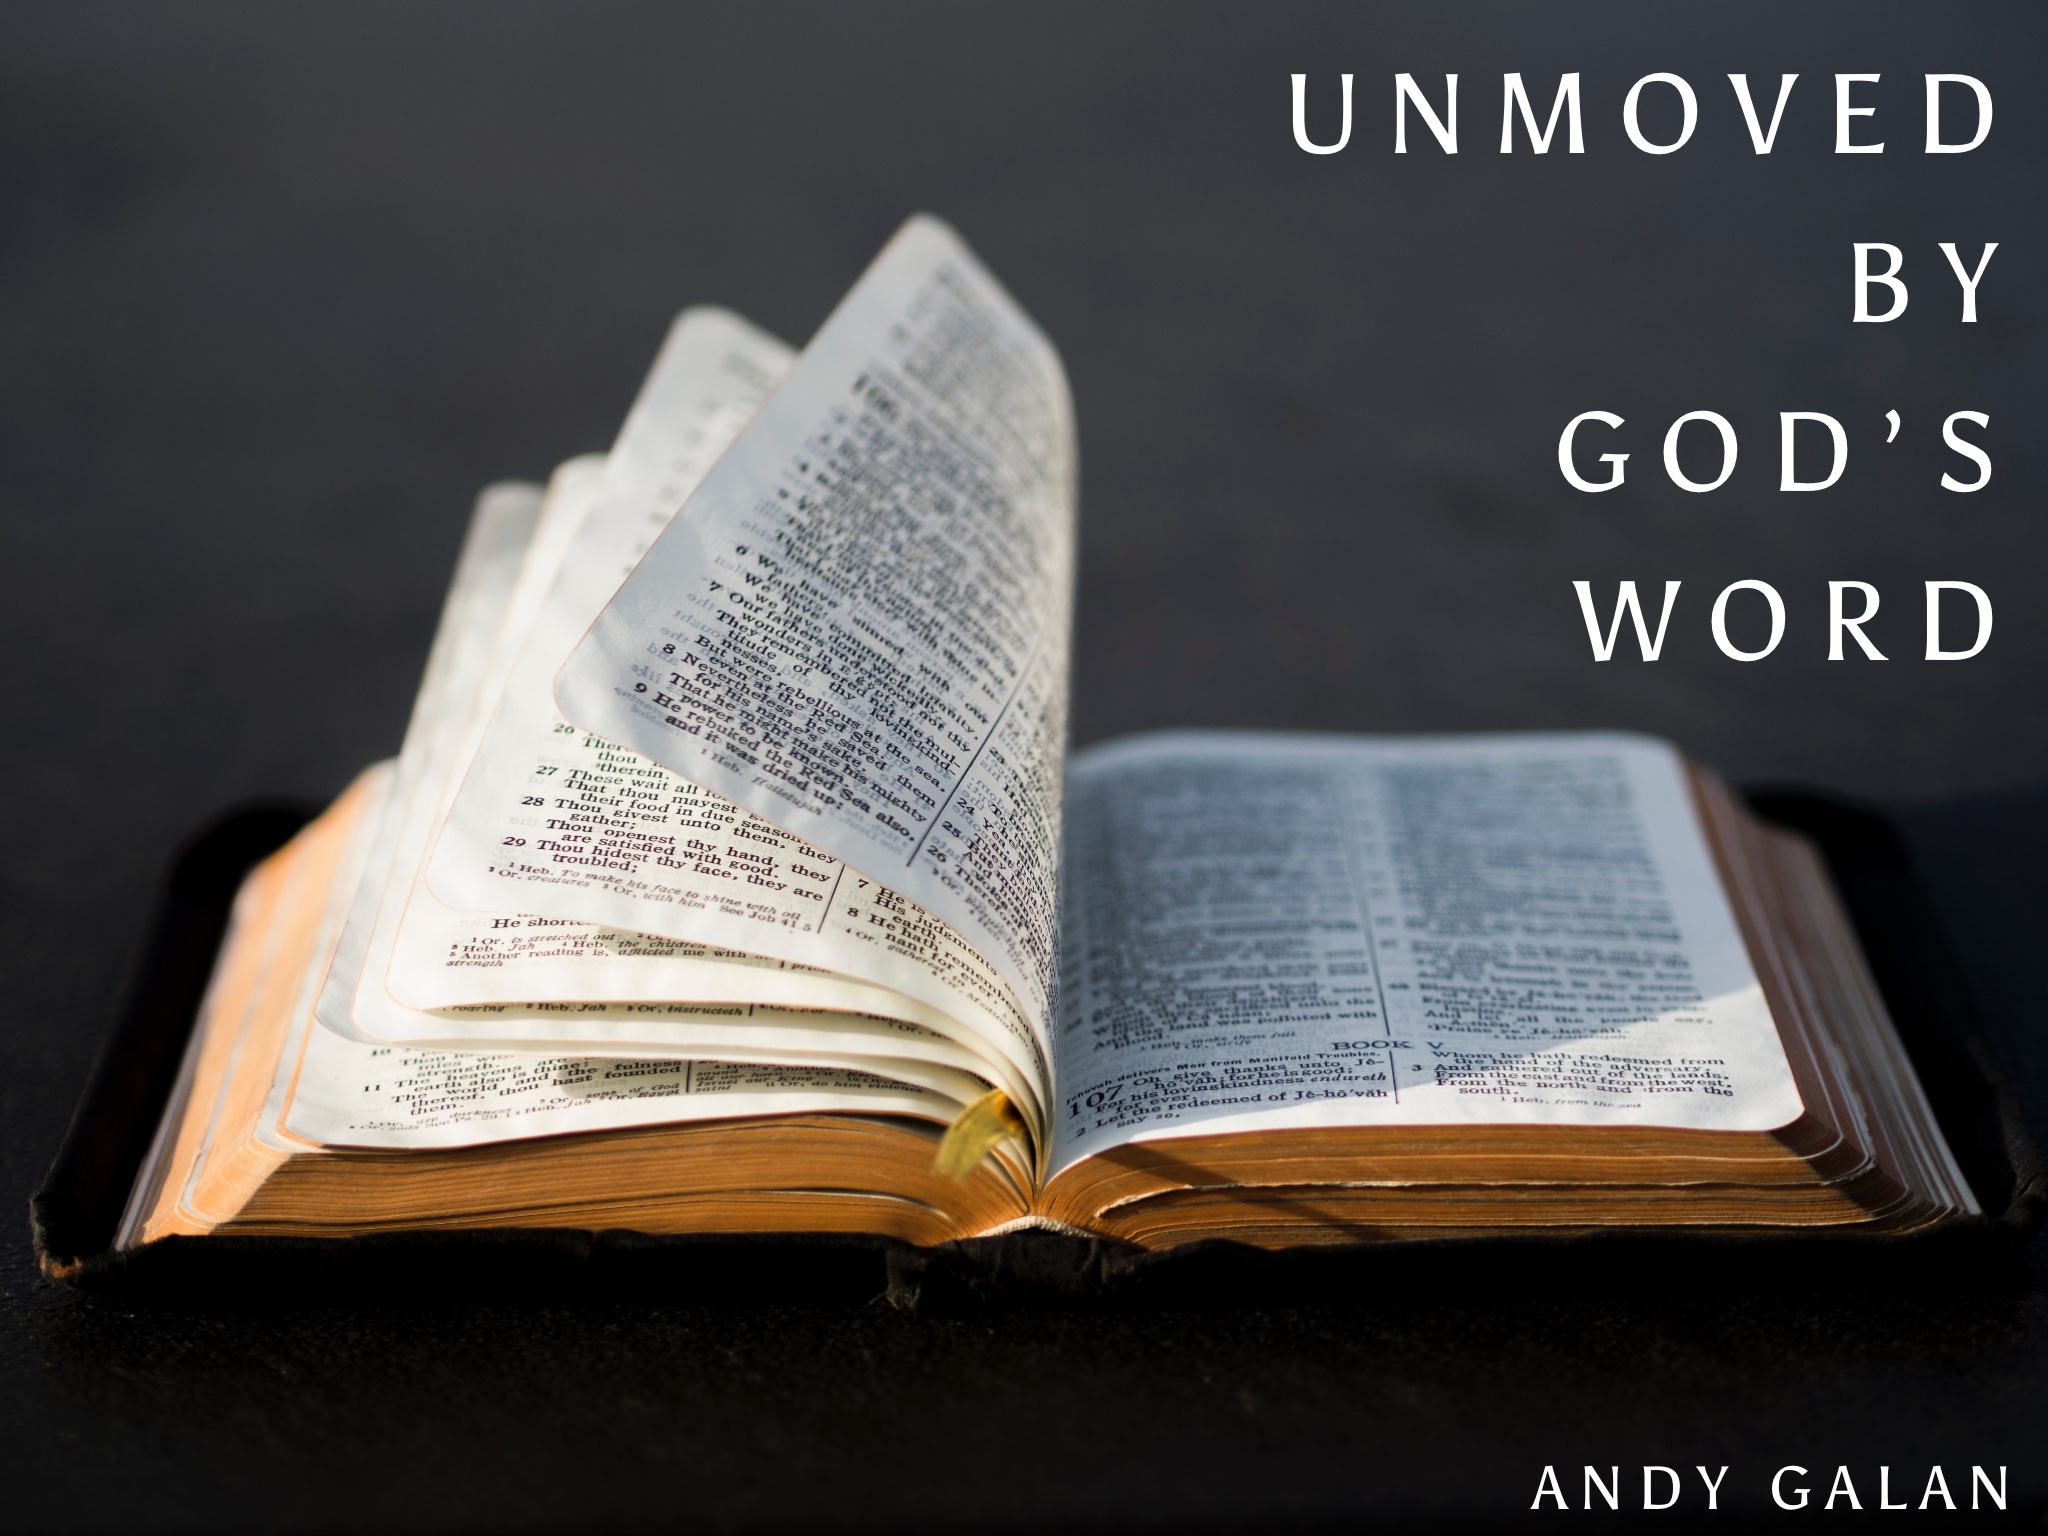 Unmoved by God’s Word